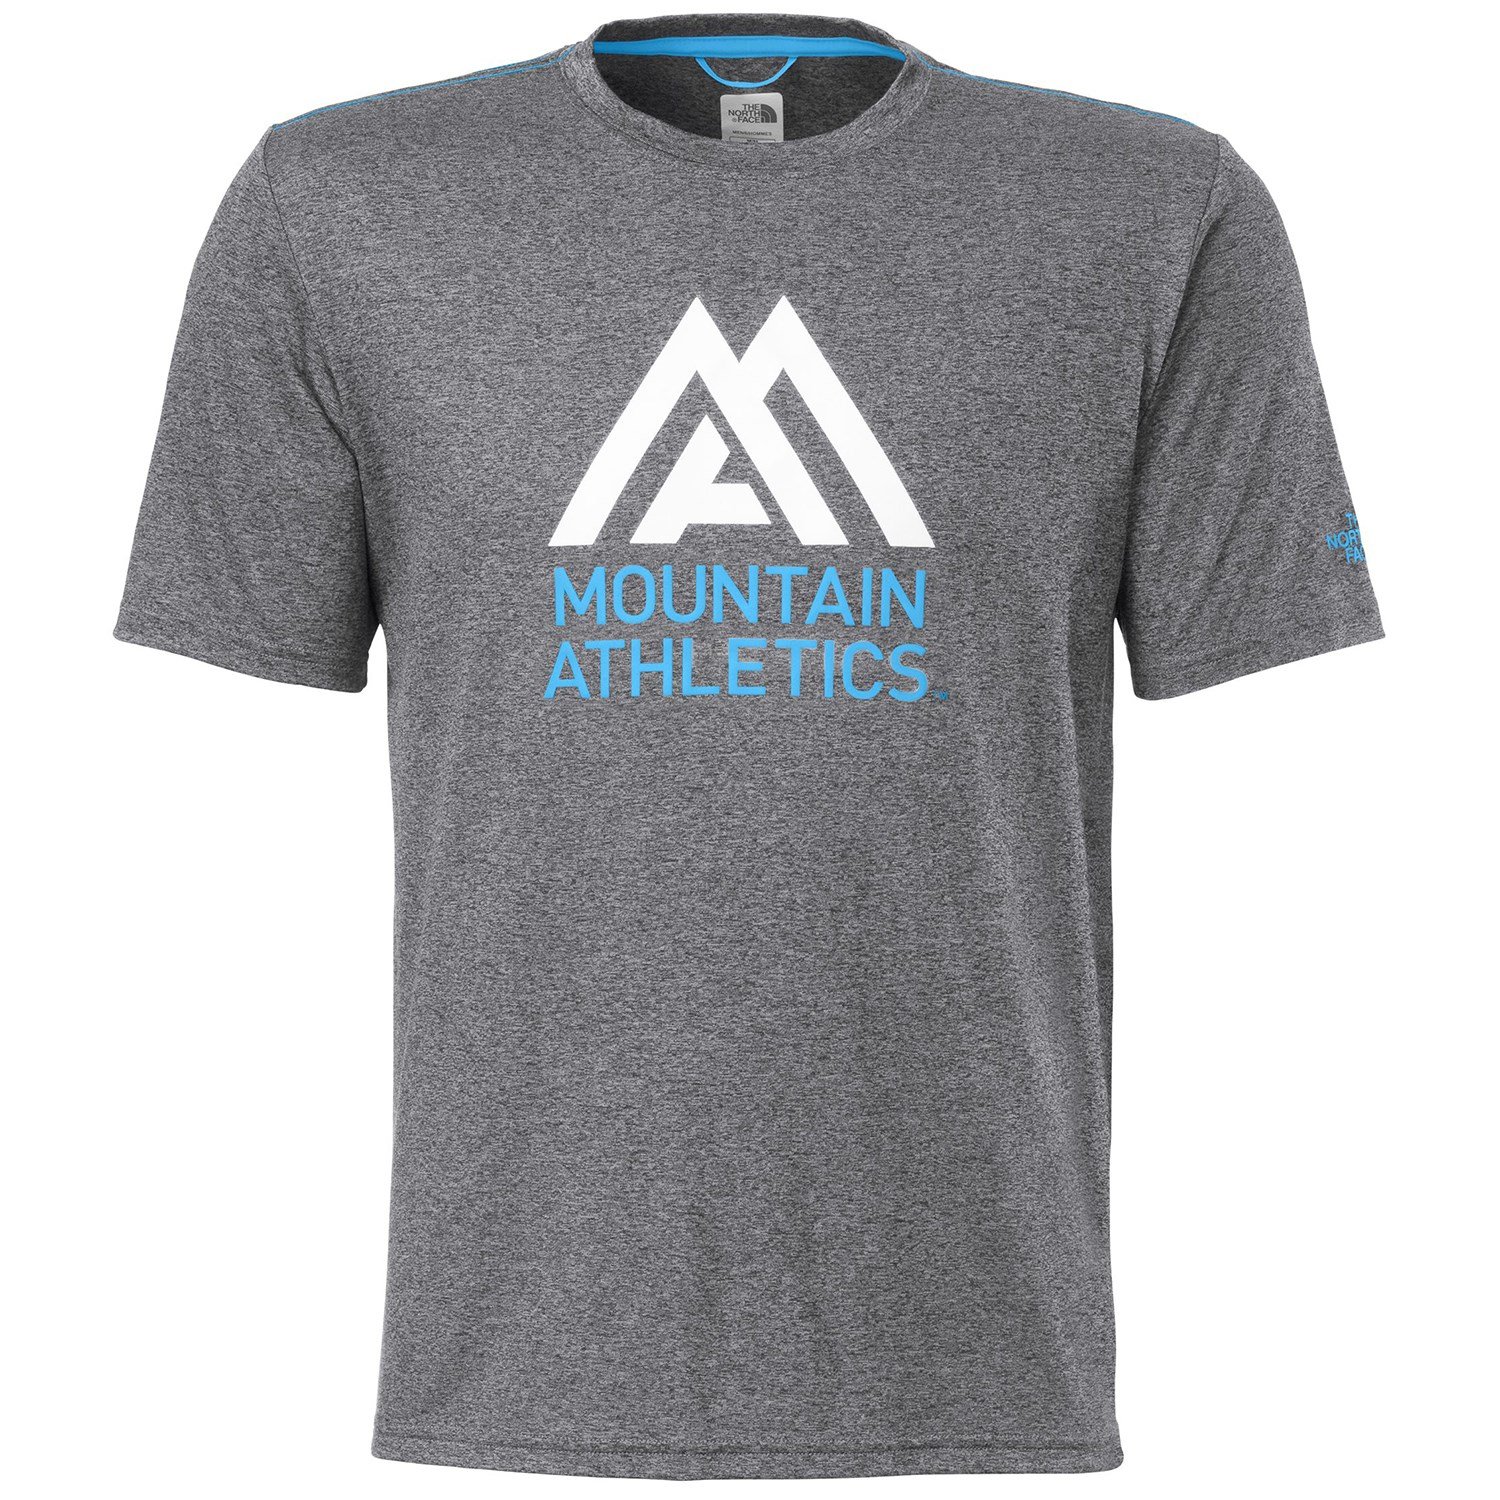 https://images.evo.com/imgp/zoom/84930/396194/the-north-face-mountain-athletics-graphic-reaxion-amp-crew-t-shirt-.jpg